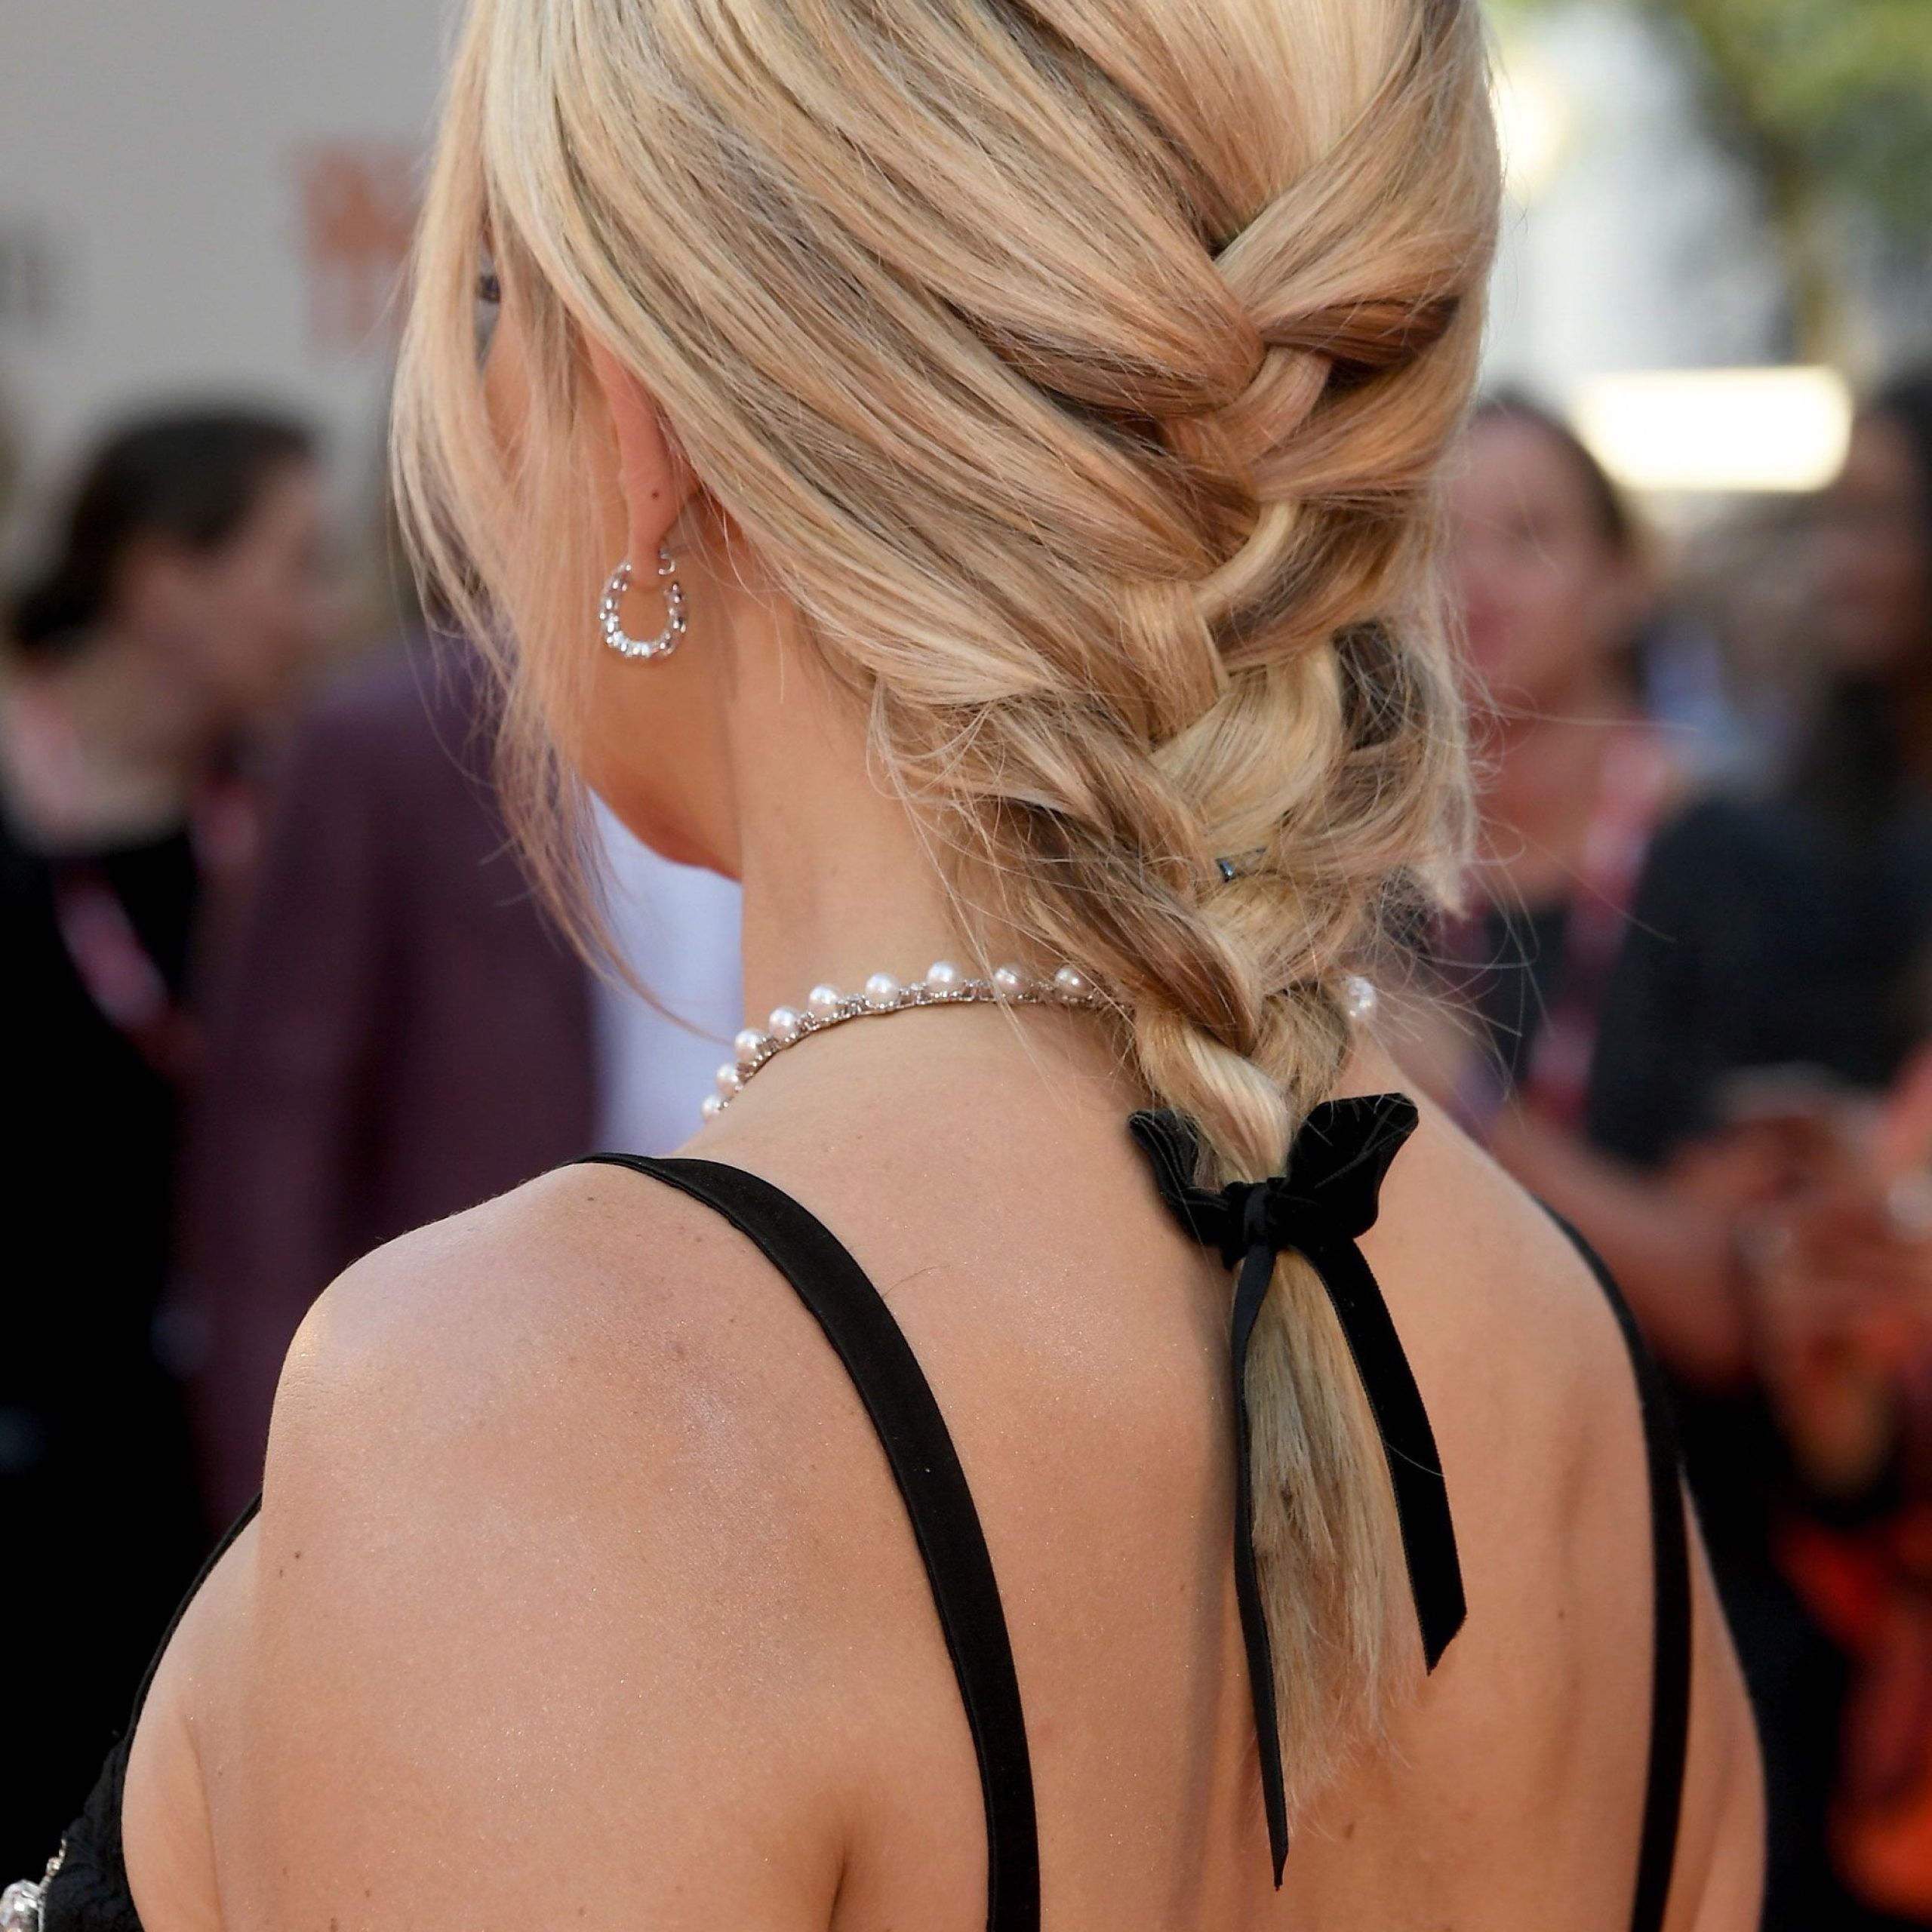 35 Easy Updo Hairstyles – Elegant Updos Inspiredcelebrities With Regard To Most Recent Ponytail Updo Hairstyles For Medium Hair (View 35 of 36)